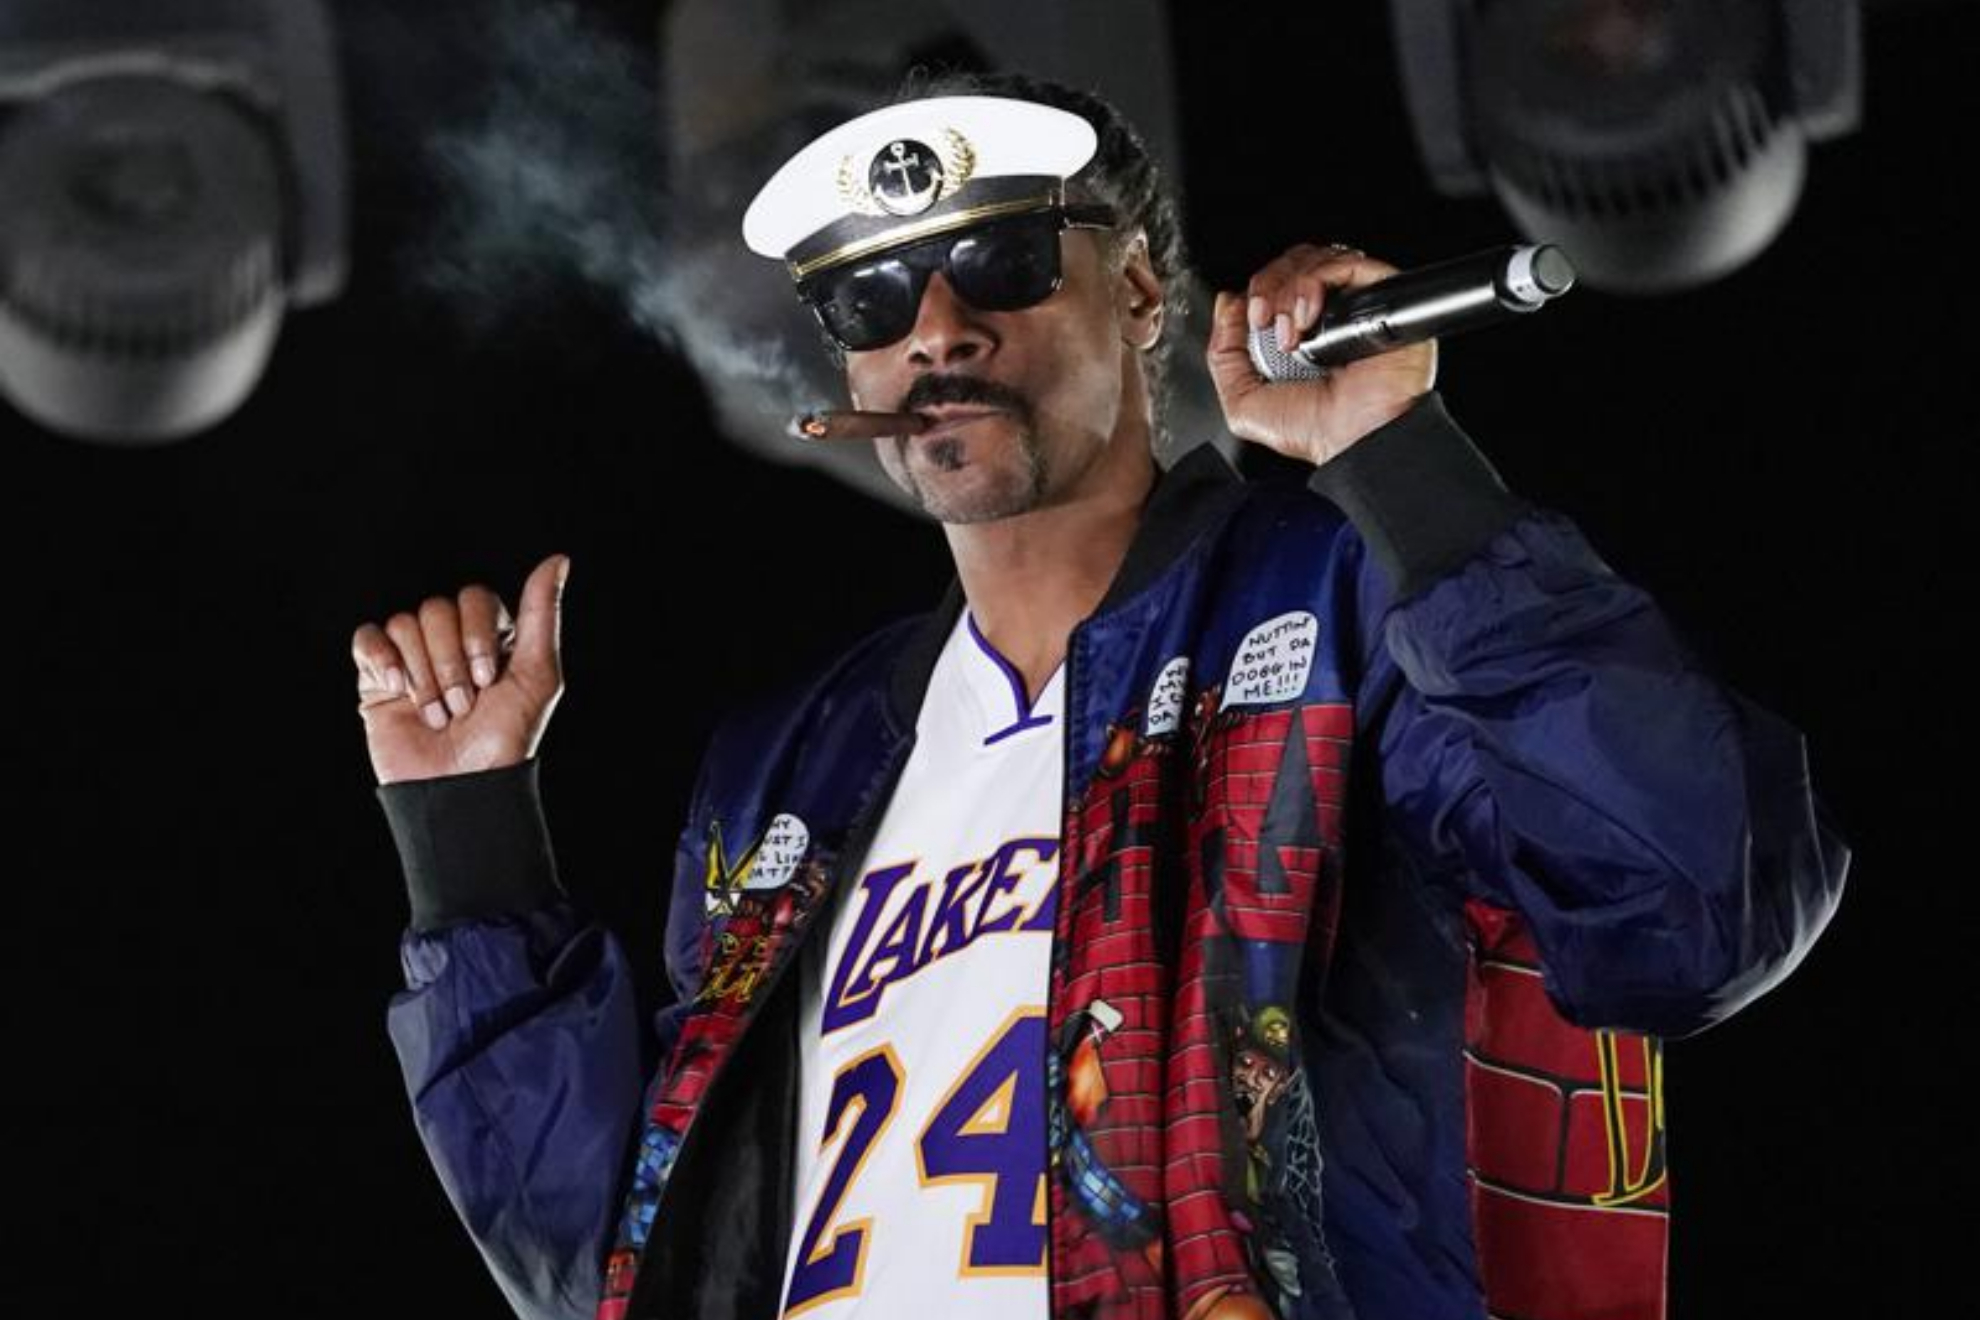 Snoop Dogg performs a DJ set as "DJ Snoopadelic" during the "Concerts In Your Car" series.